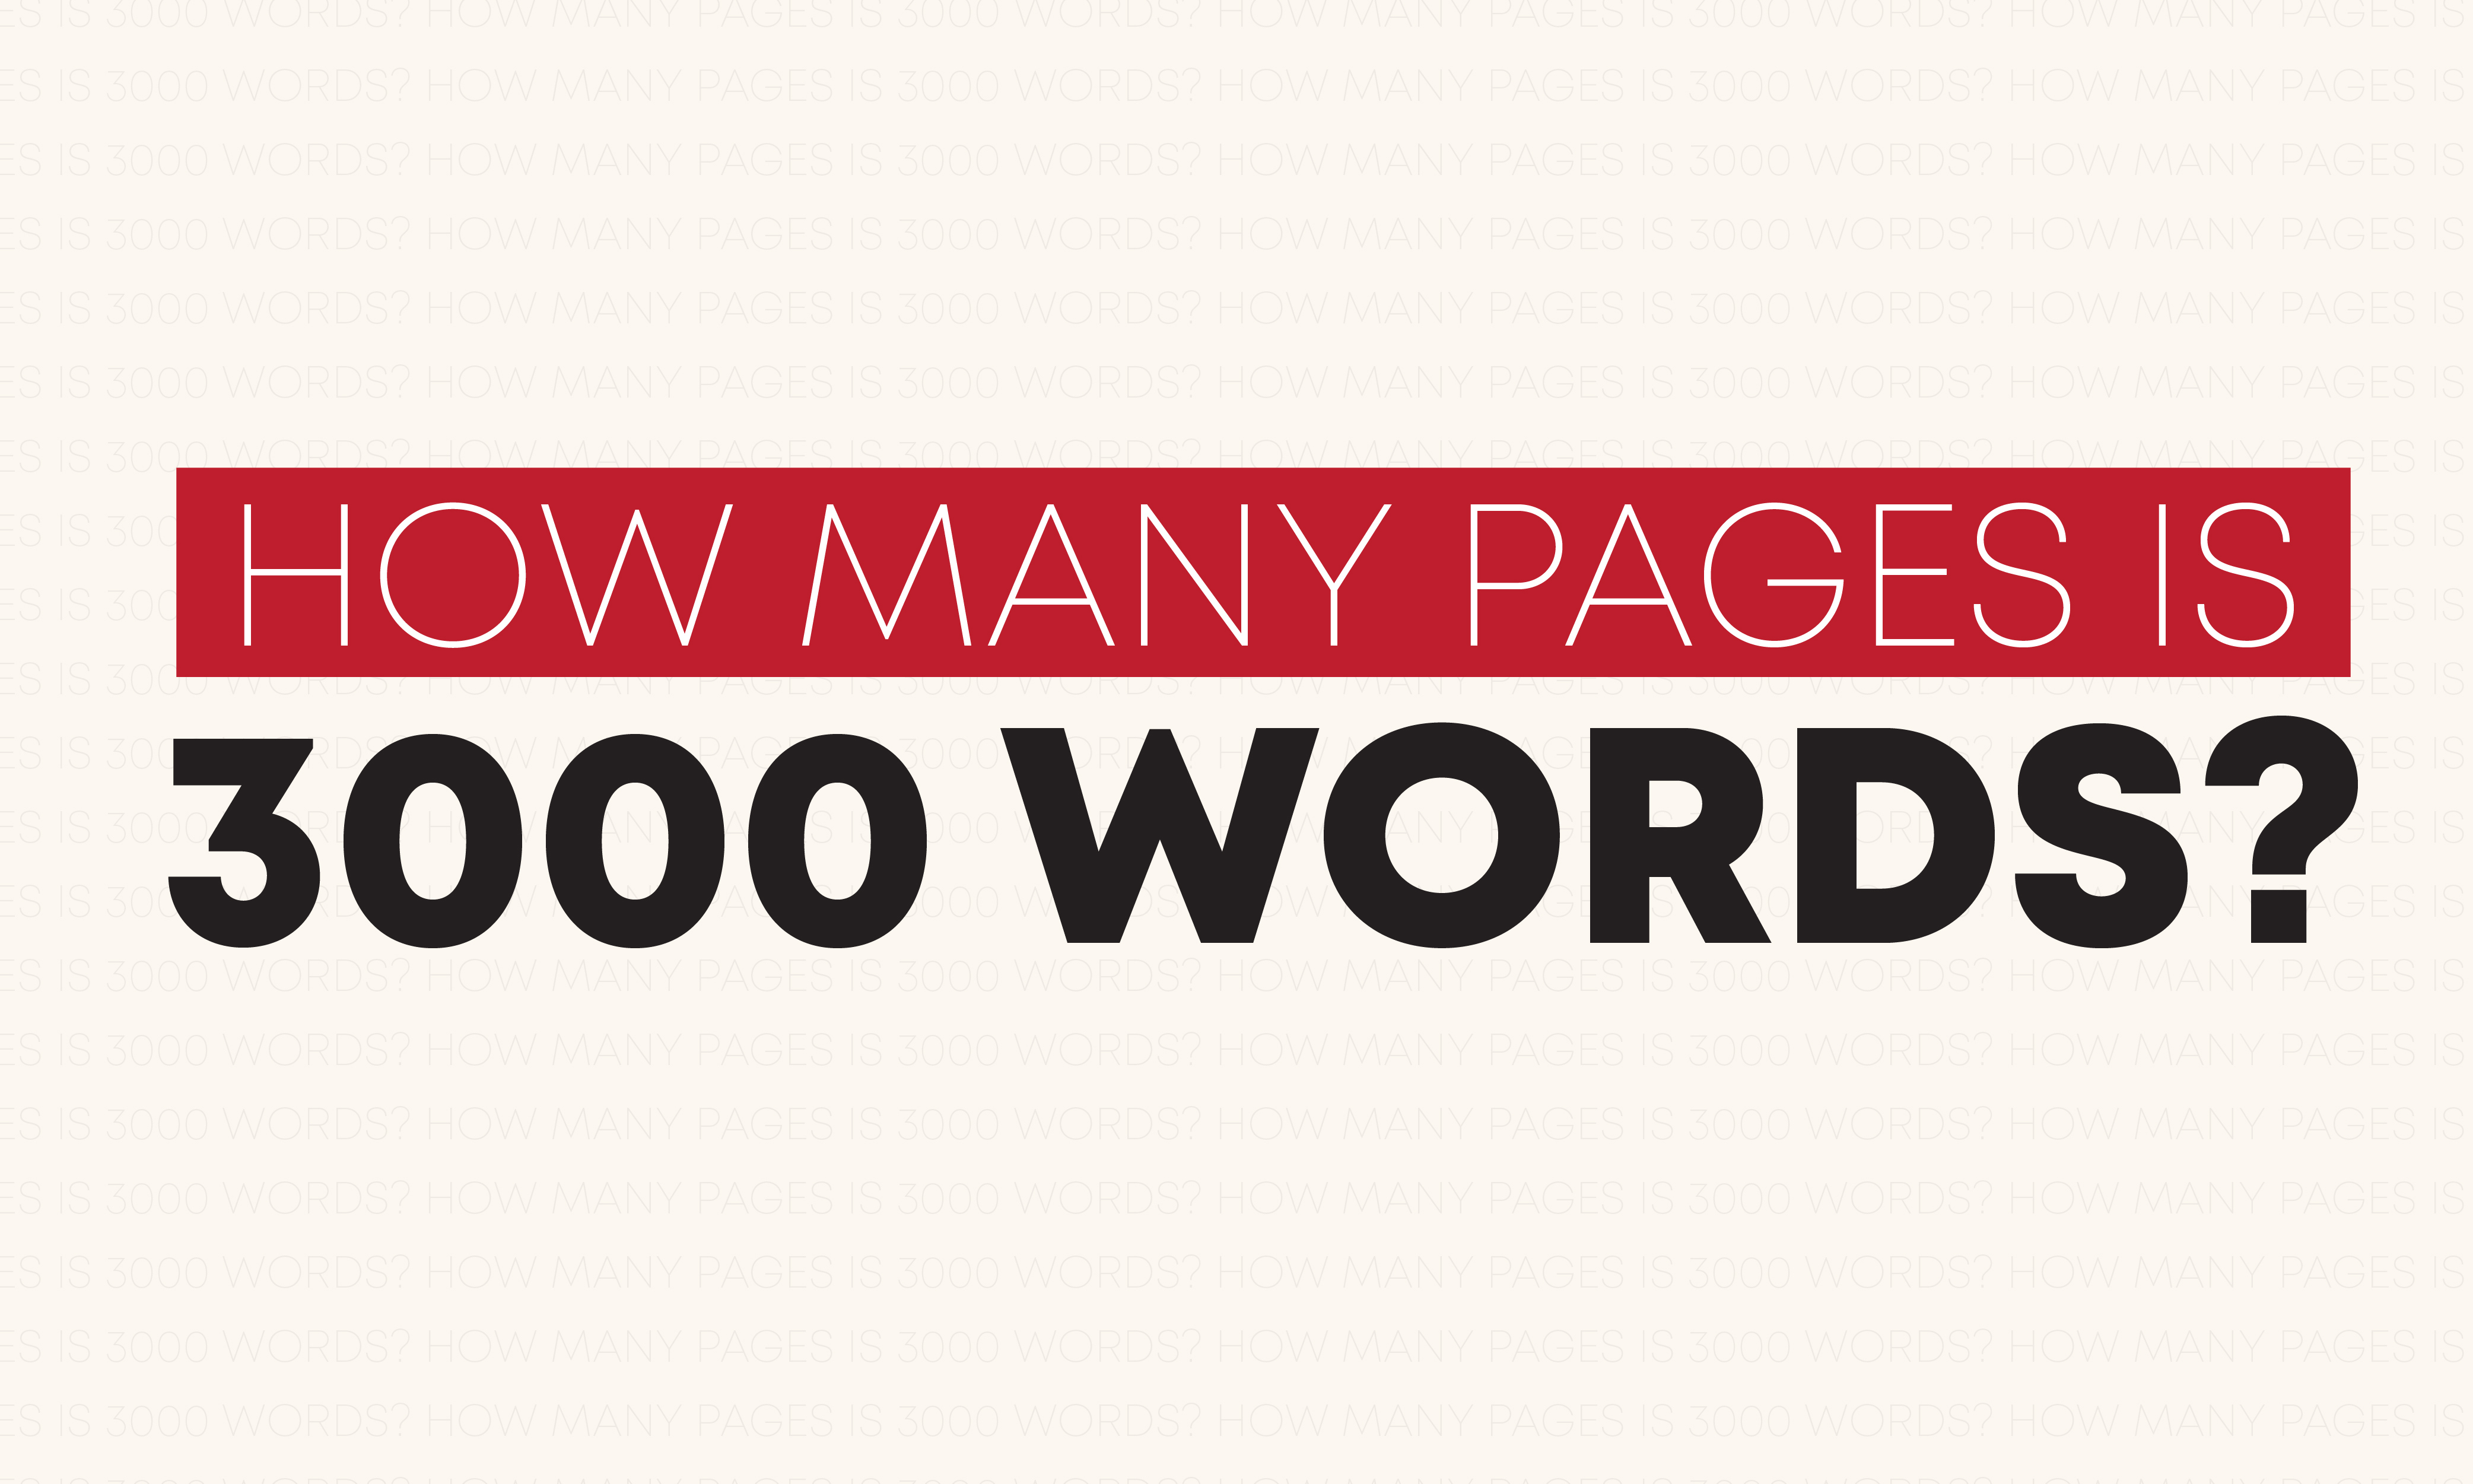 How many pages is 3,000 words?